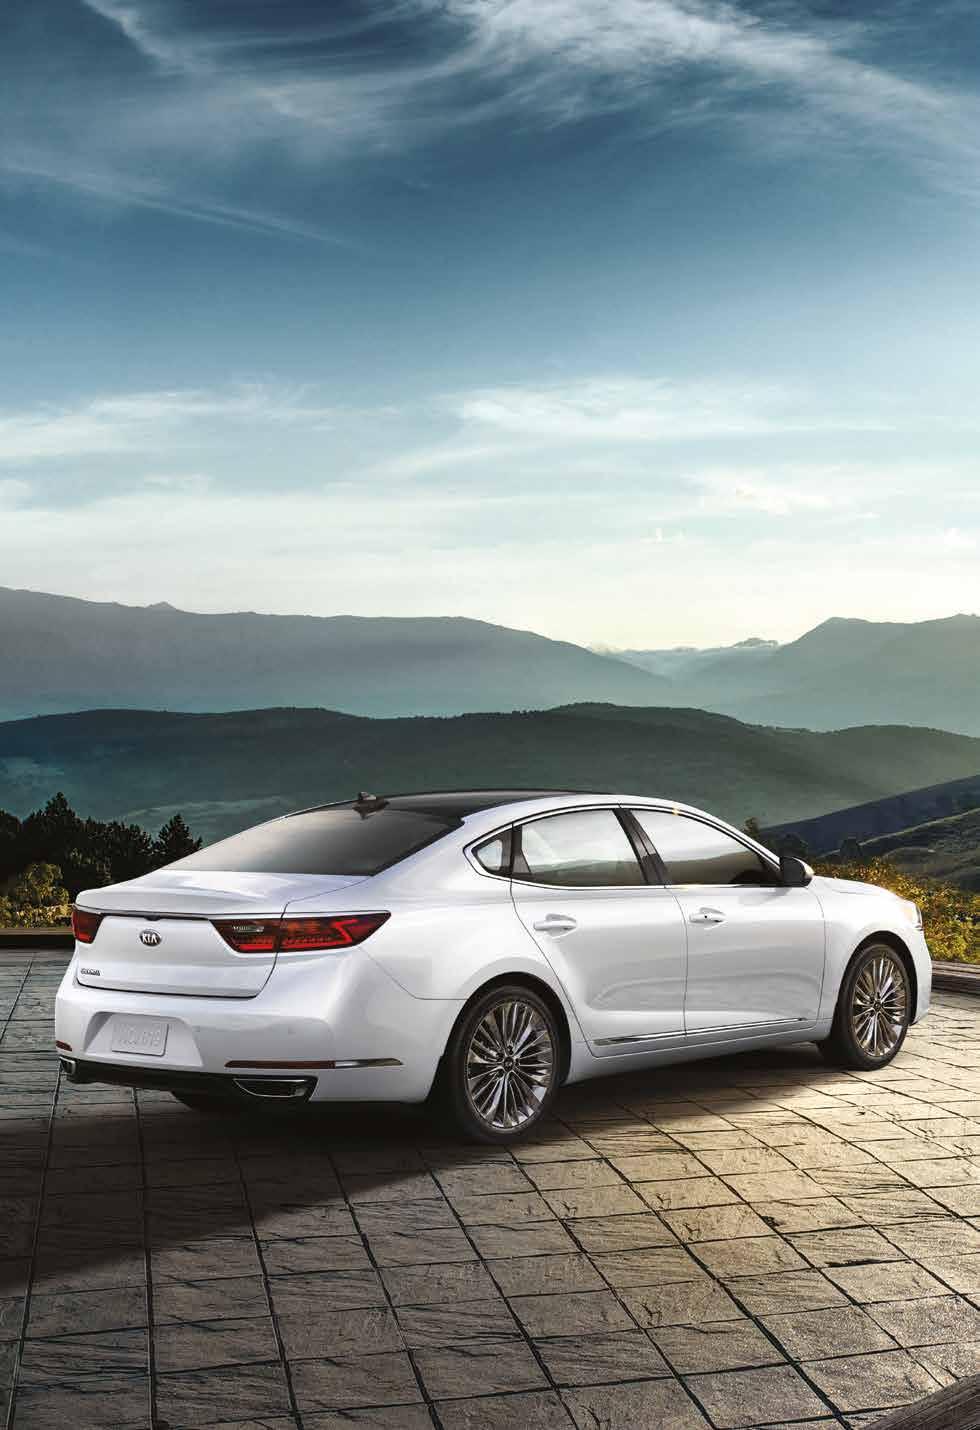 KIA.CA/CADENZA OVERVIEW We crafted EVERY DETAIL with you in mind The genius is in the details the sweeping